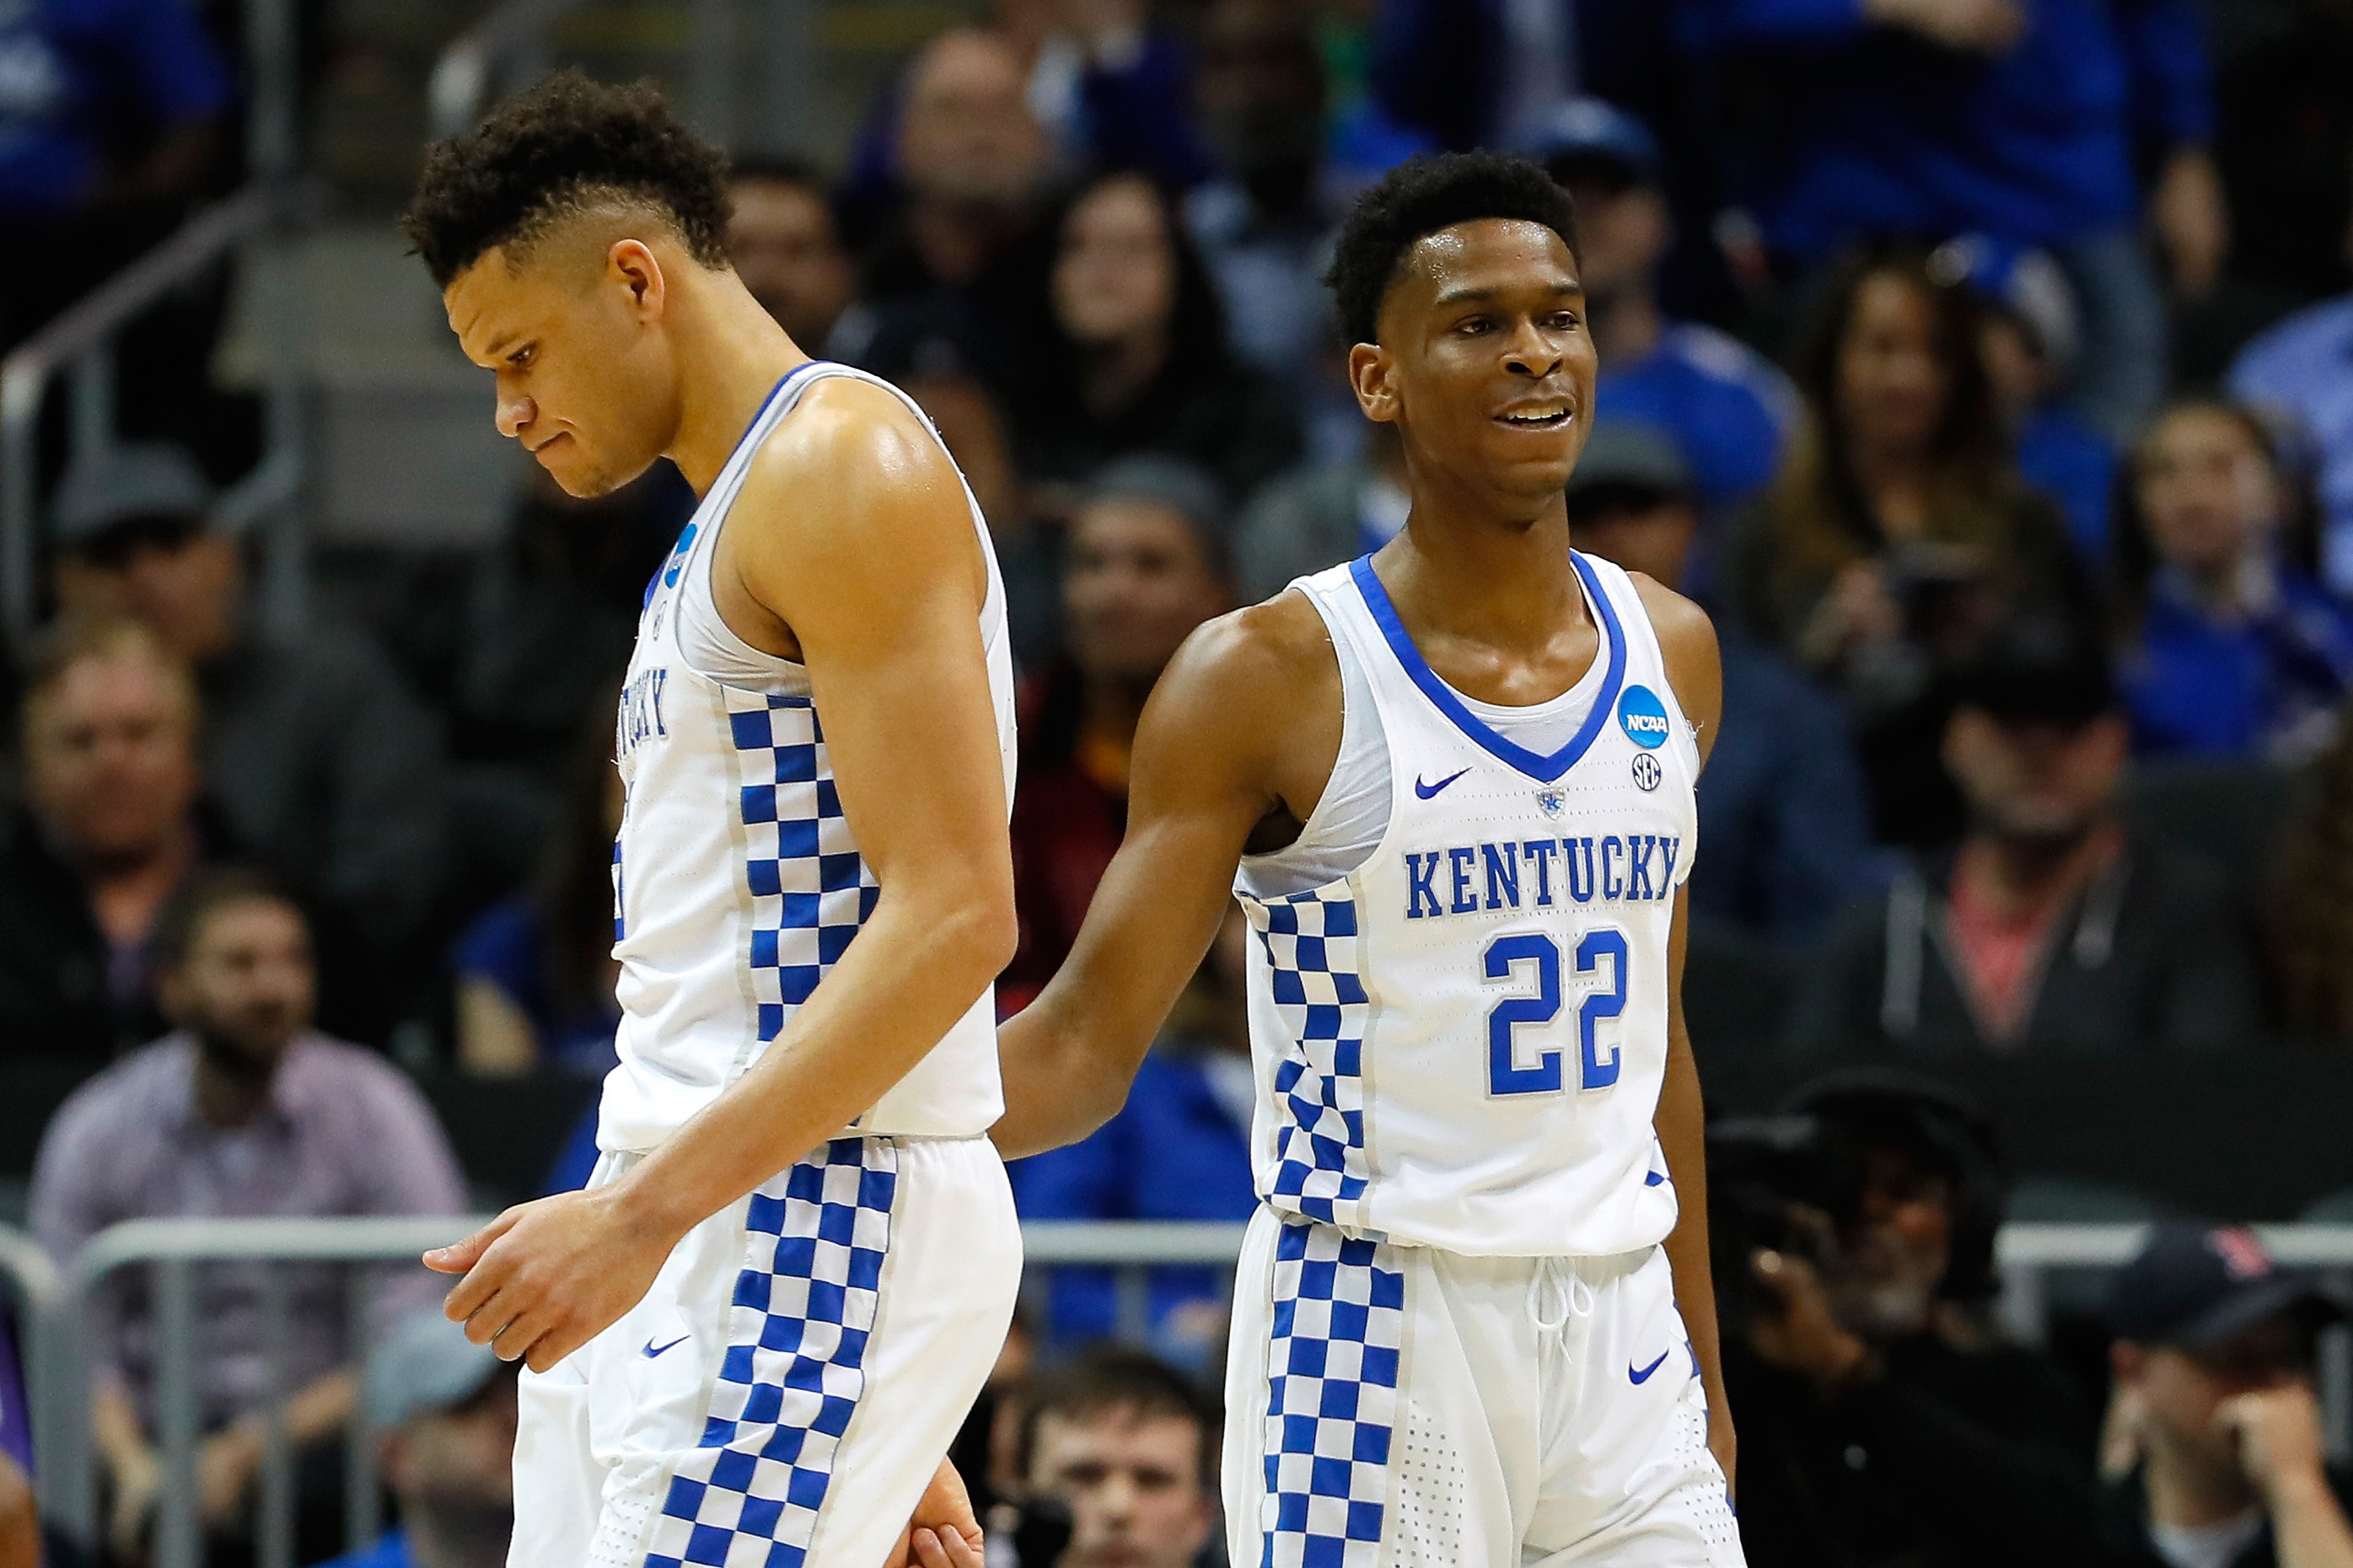 2018 Two Round NBA Mock Draft: The Final Version